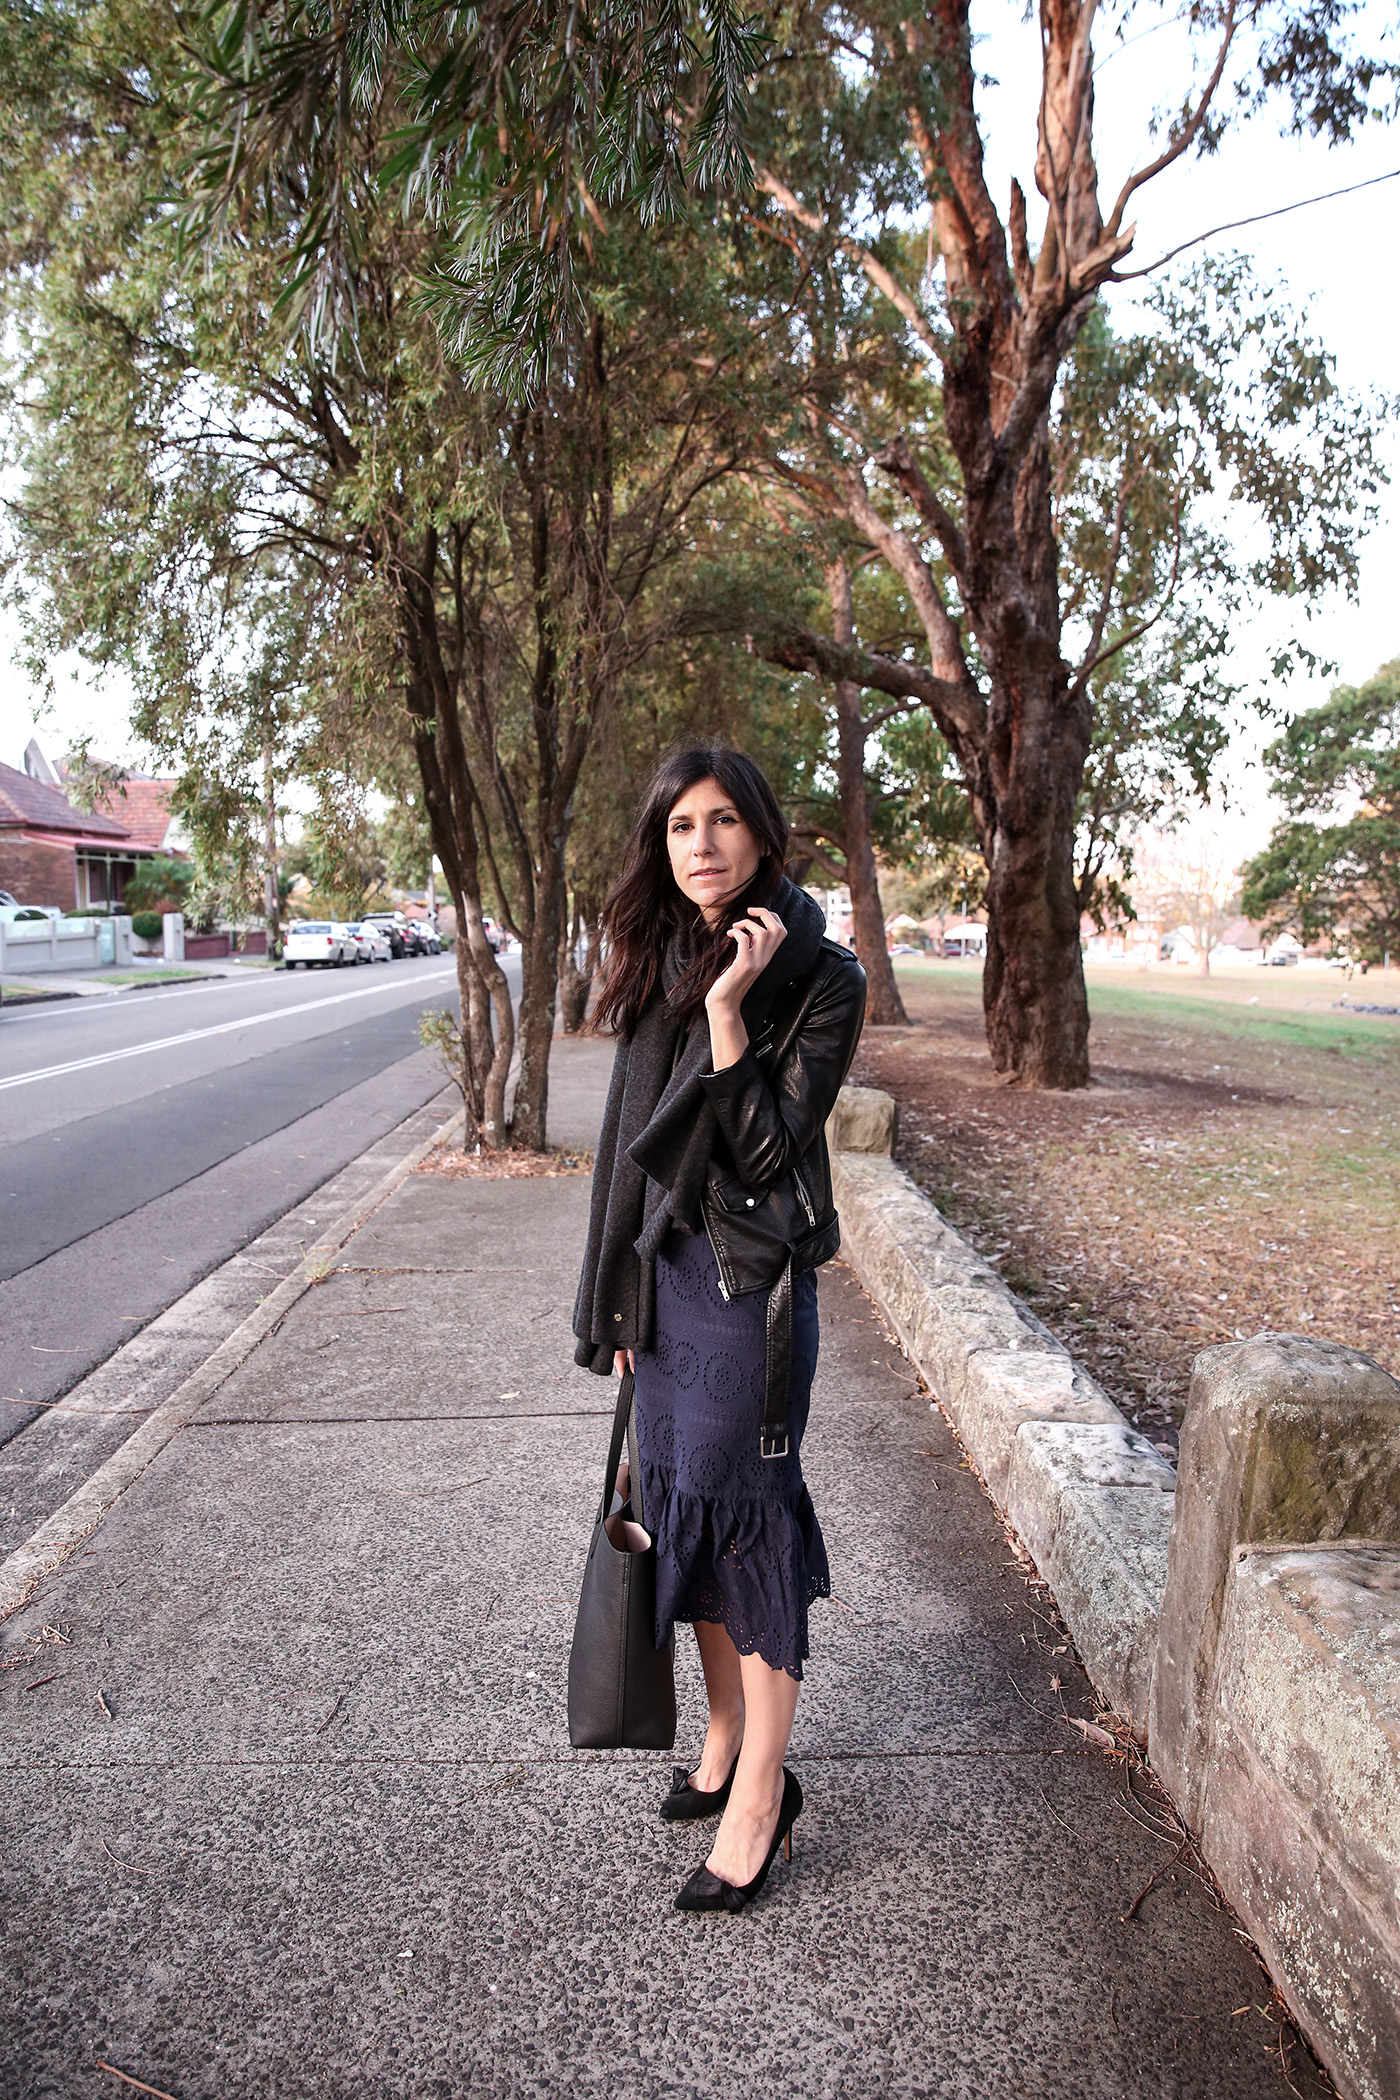 Workwear outfit wearing a navy broderie anglaise skirt for autumn and winter